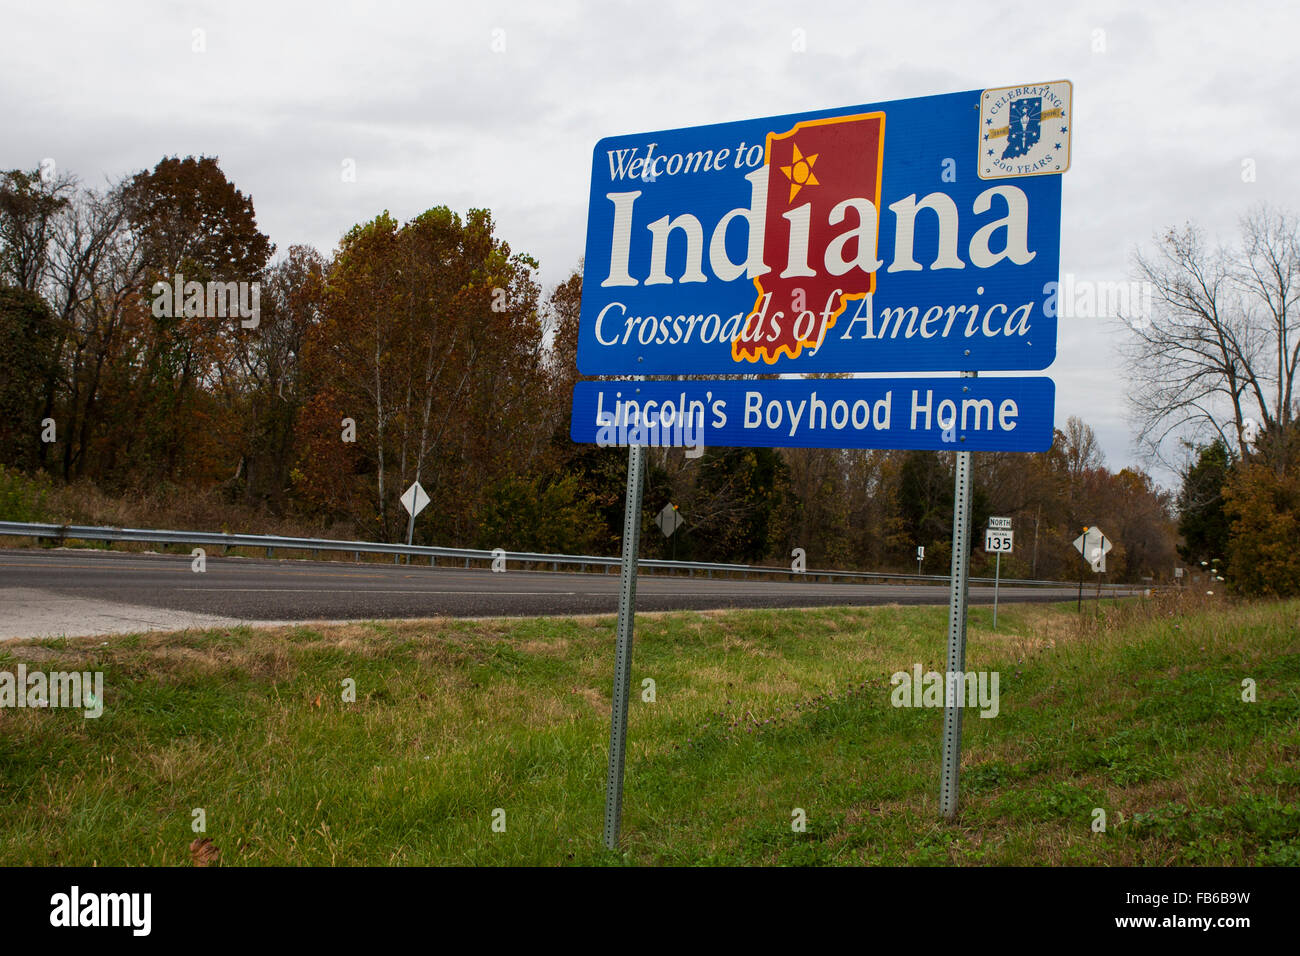 Welcome to Indiana Crossroads of America Lincoln's Boyhood Home sign, Indiana, United States of America Stock Photo